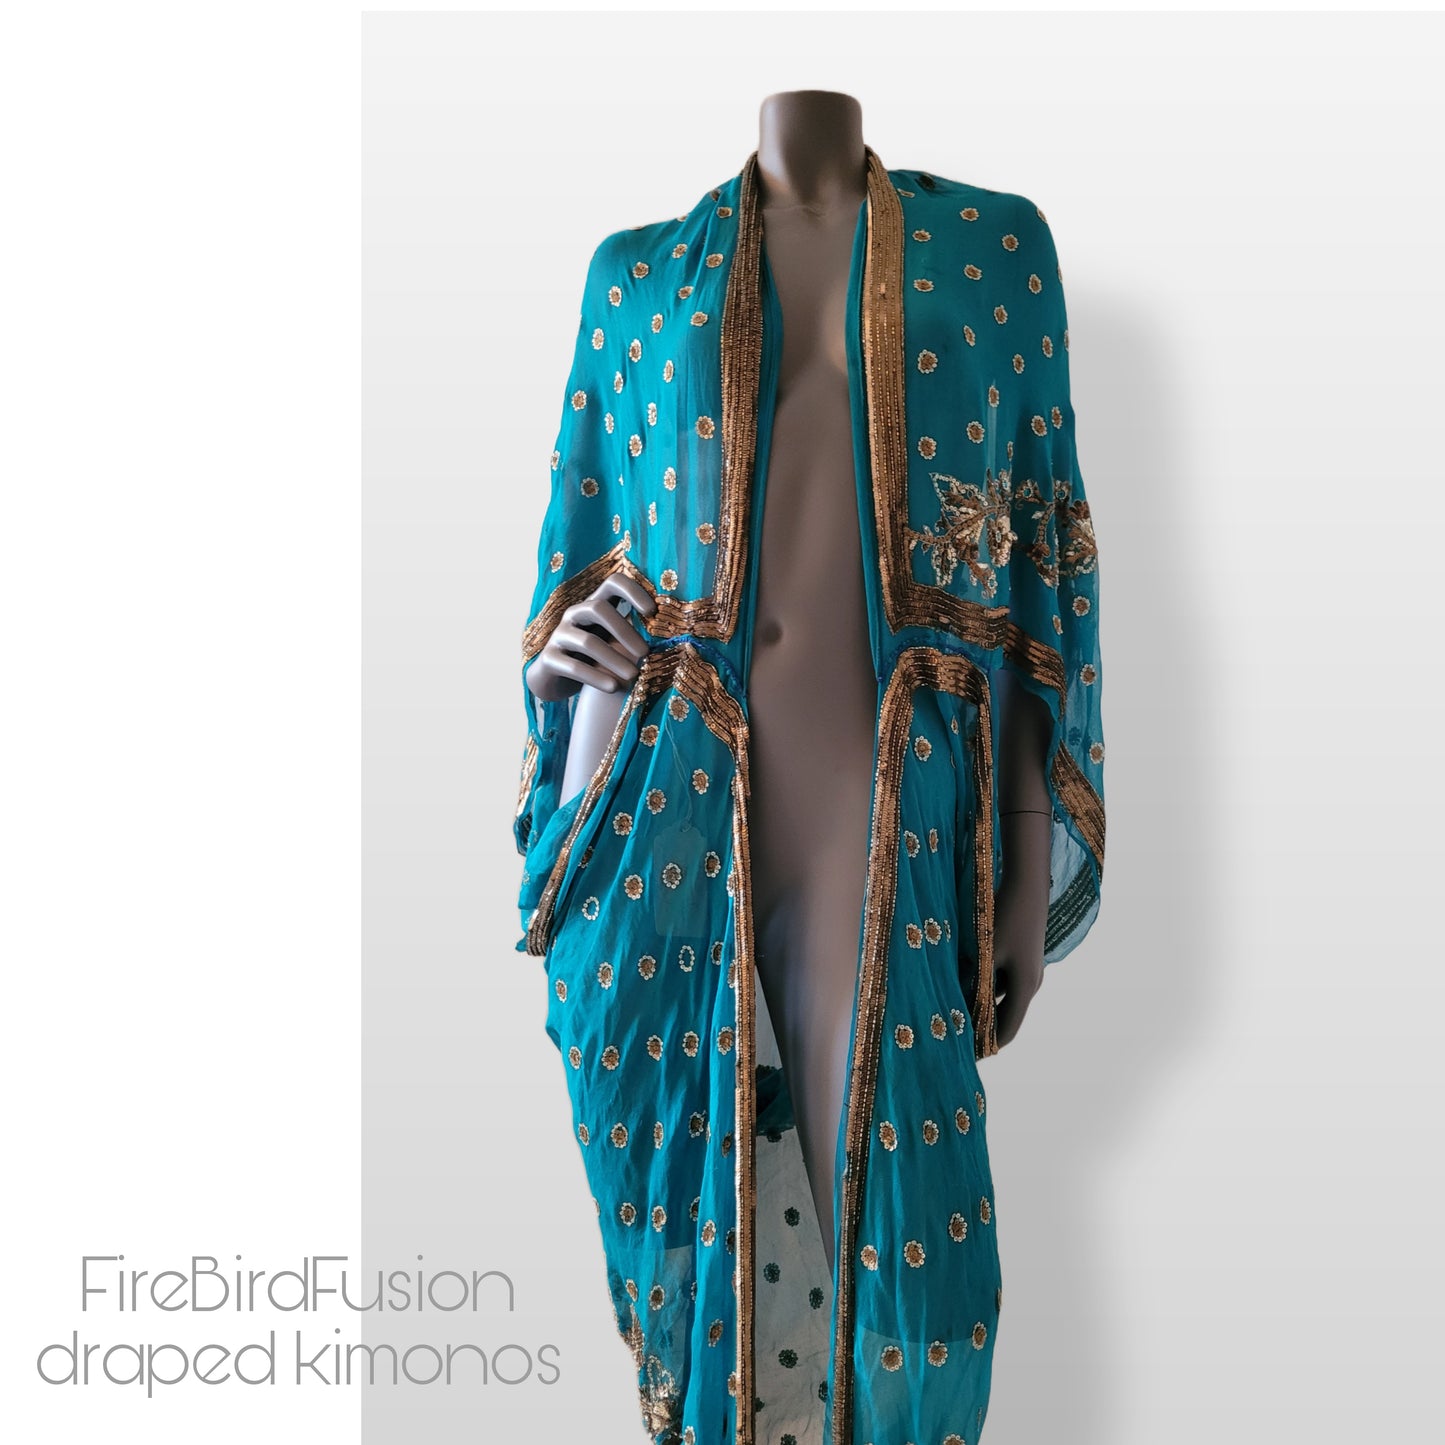 Luxurious draped kimono, peacock blue with elaborated hand embroidery in bronze, gold and blue (L-XL)